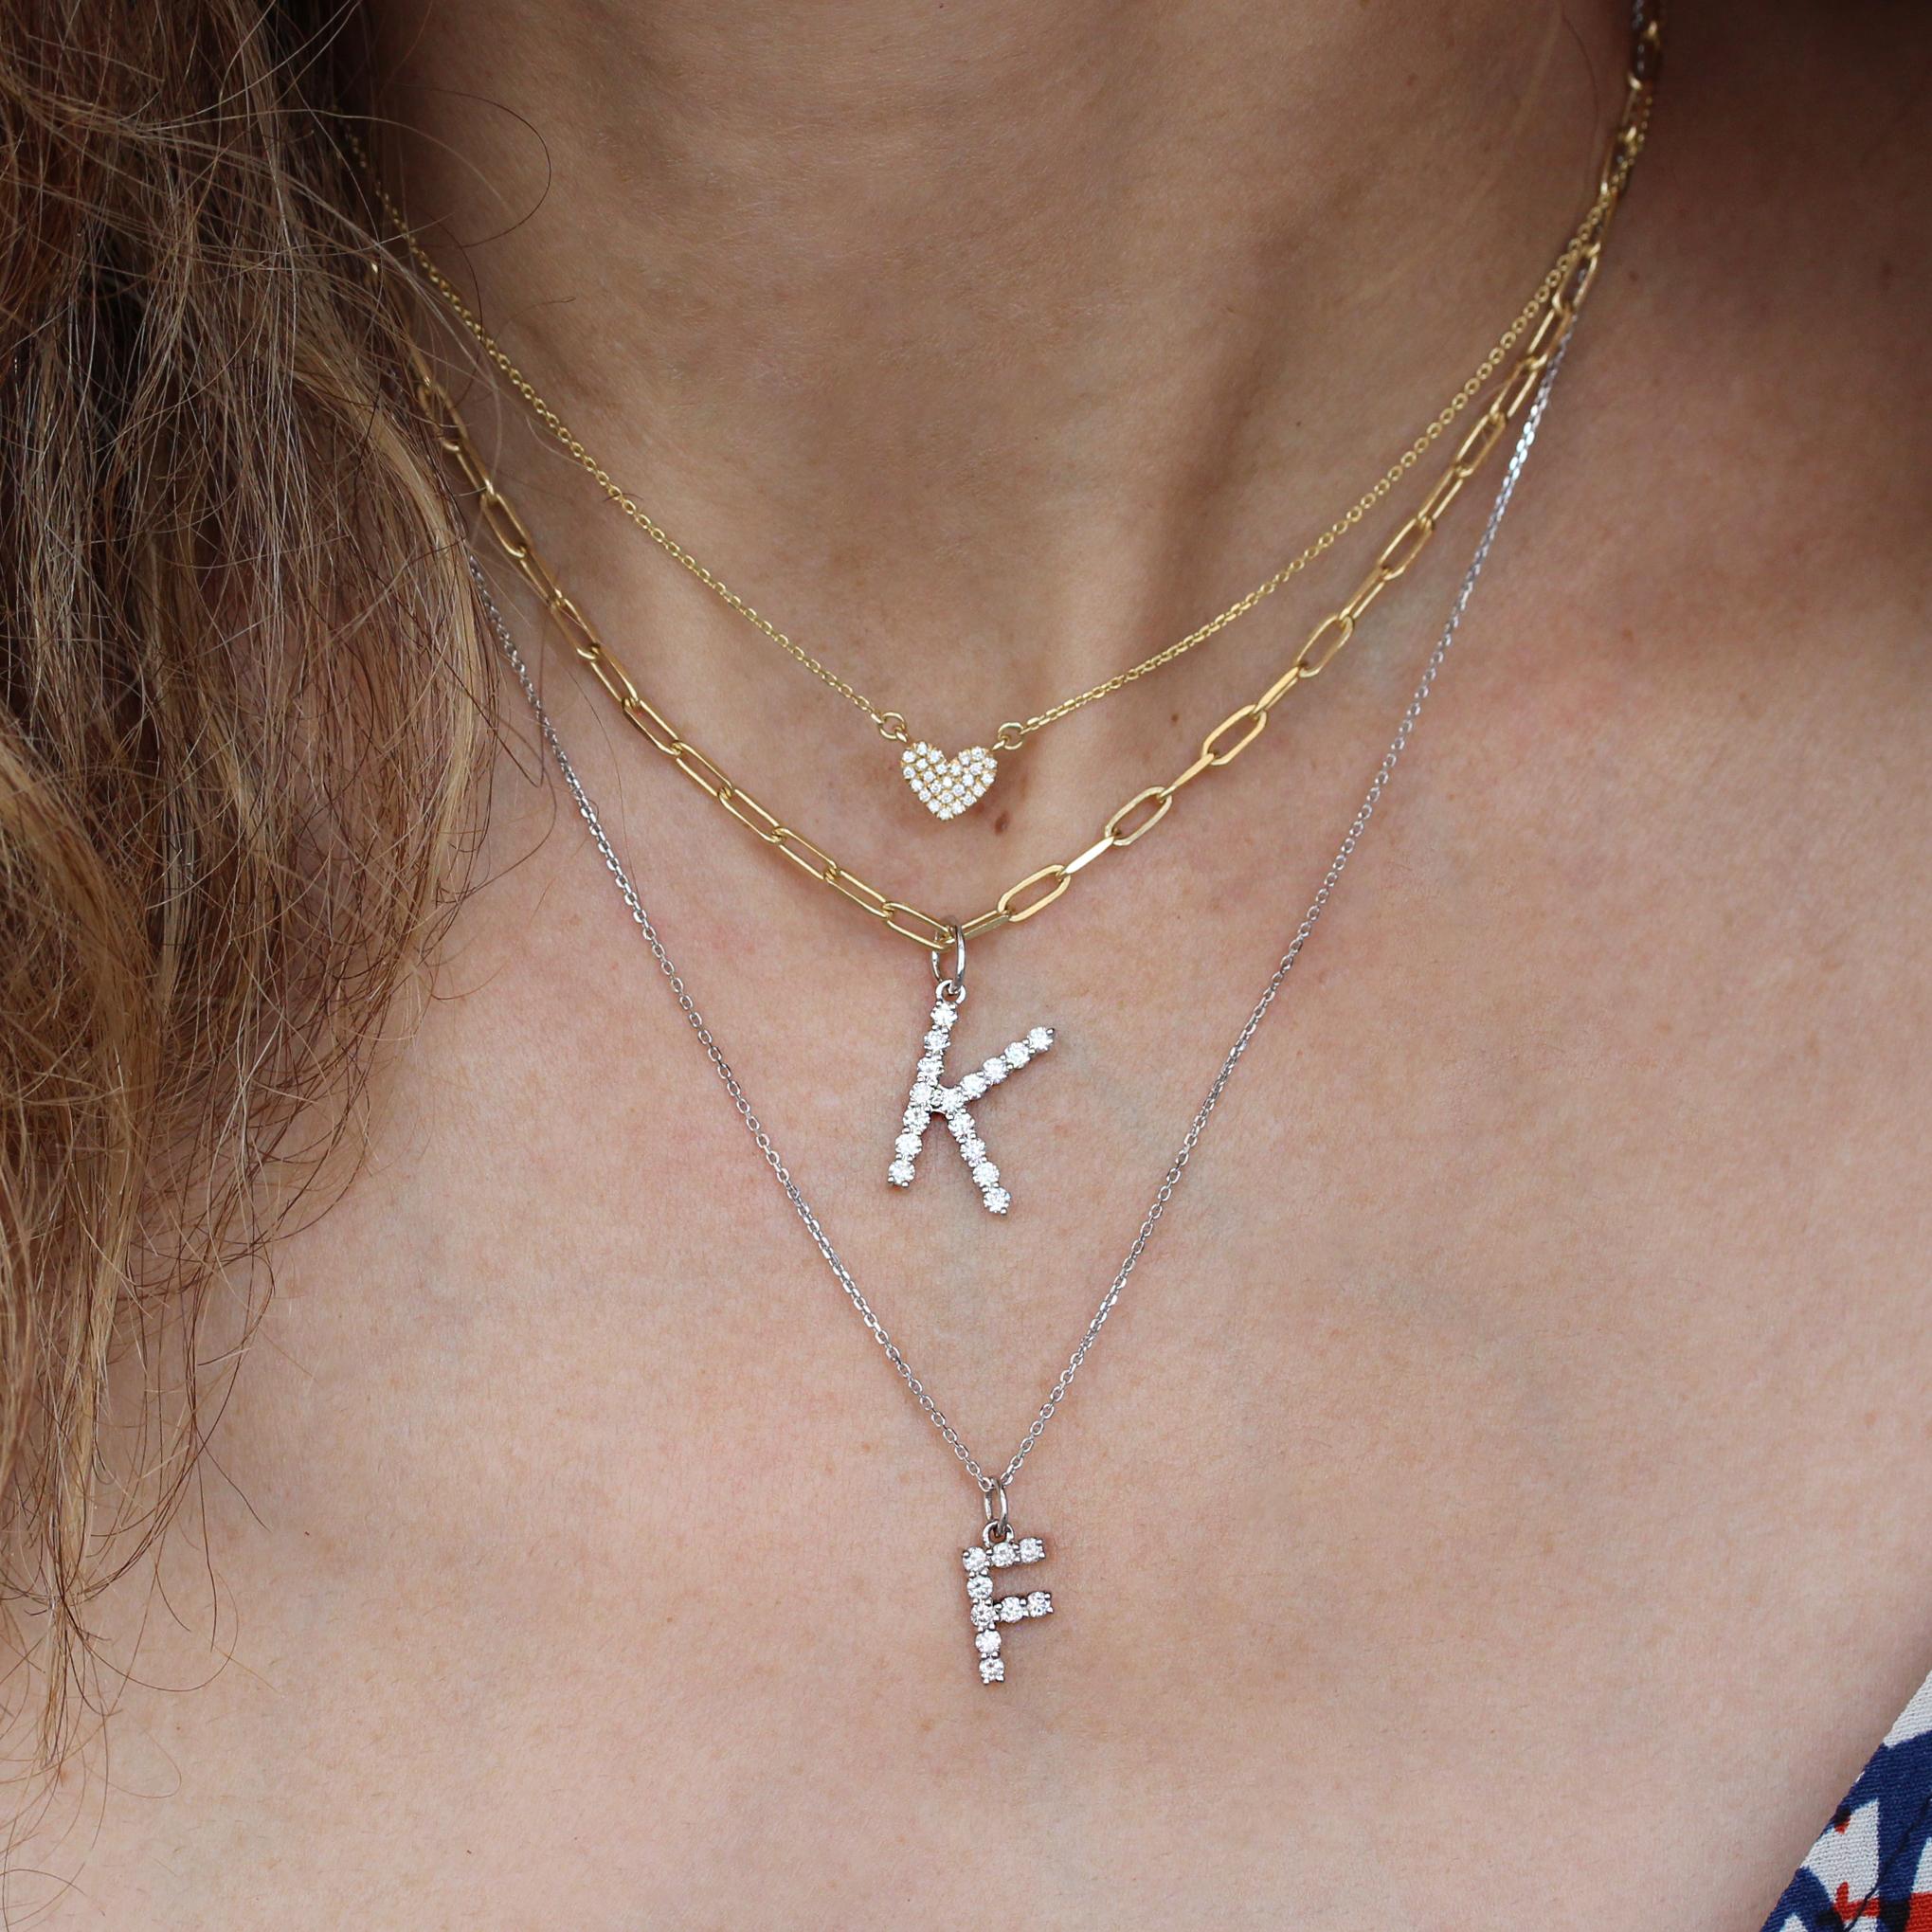 Giant Diamond Initial Charm - the perfect friendship gift, valentines gift, personalized gift, or new mom gift. Wear your own initial or the initial of your loved ones. We love this style alone or layered with other necklaces.
The list is for the